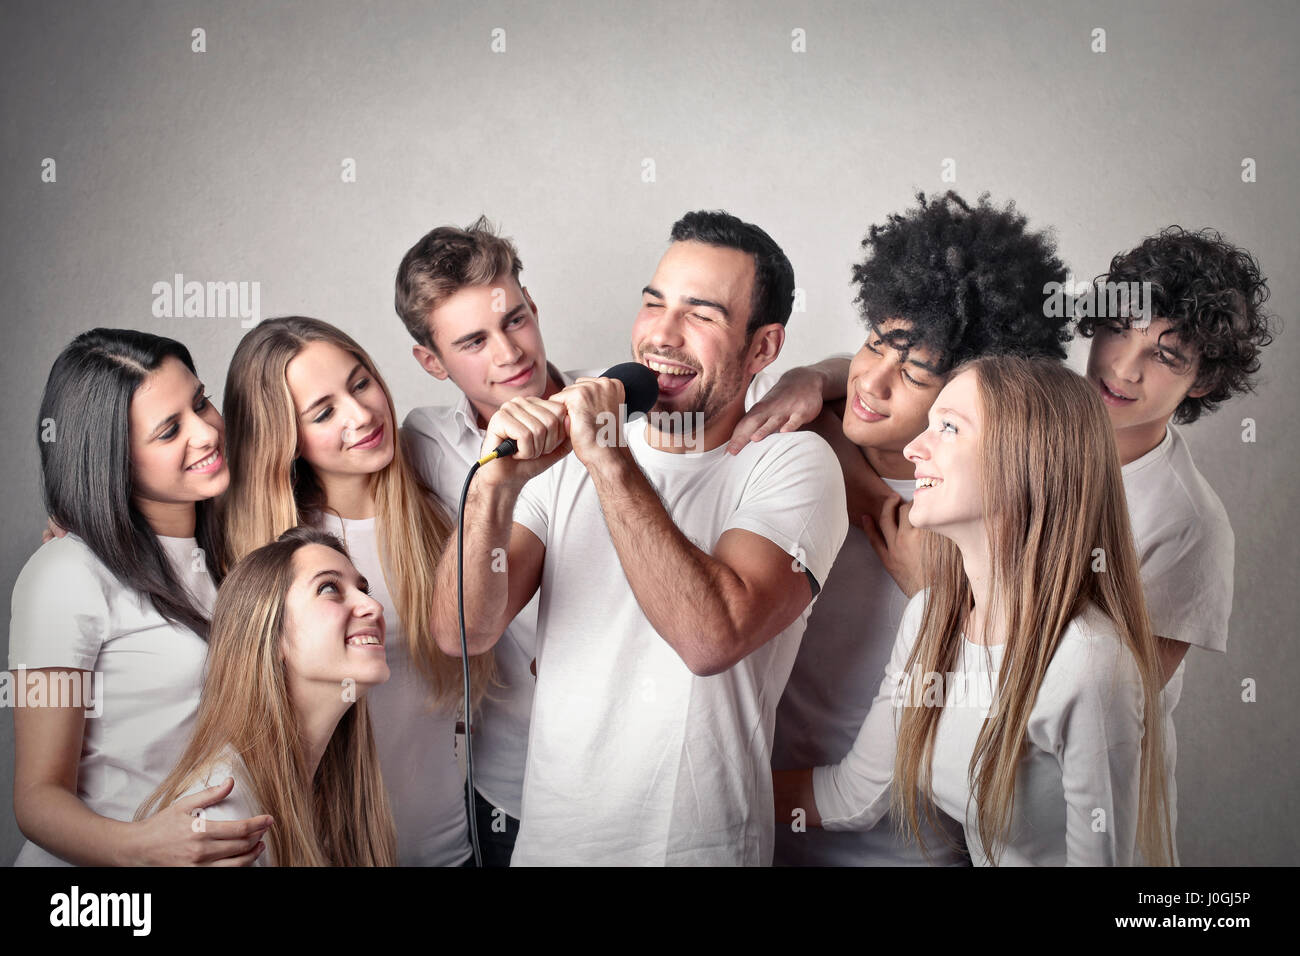 Man singing with friends Stock Photo